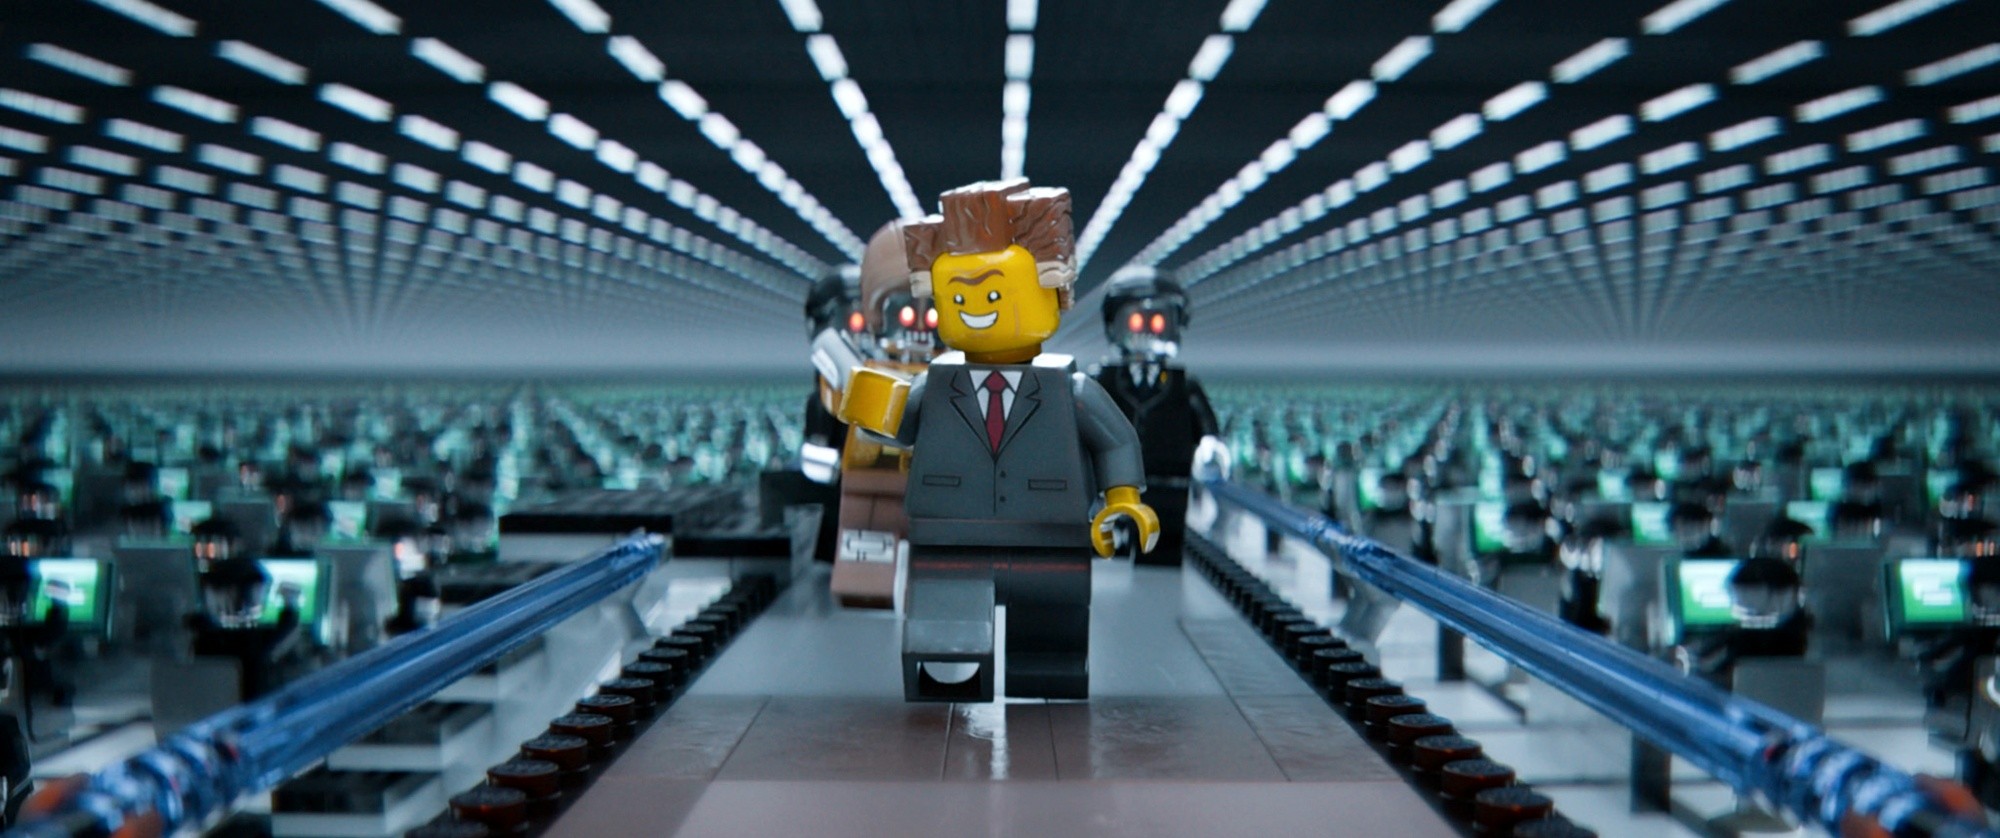 Lord Business from Warner Bros. Pictures' The Lego Movie (2014)